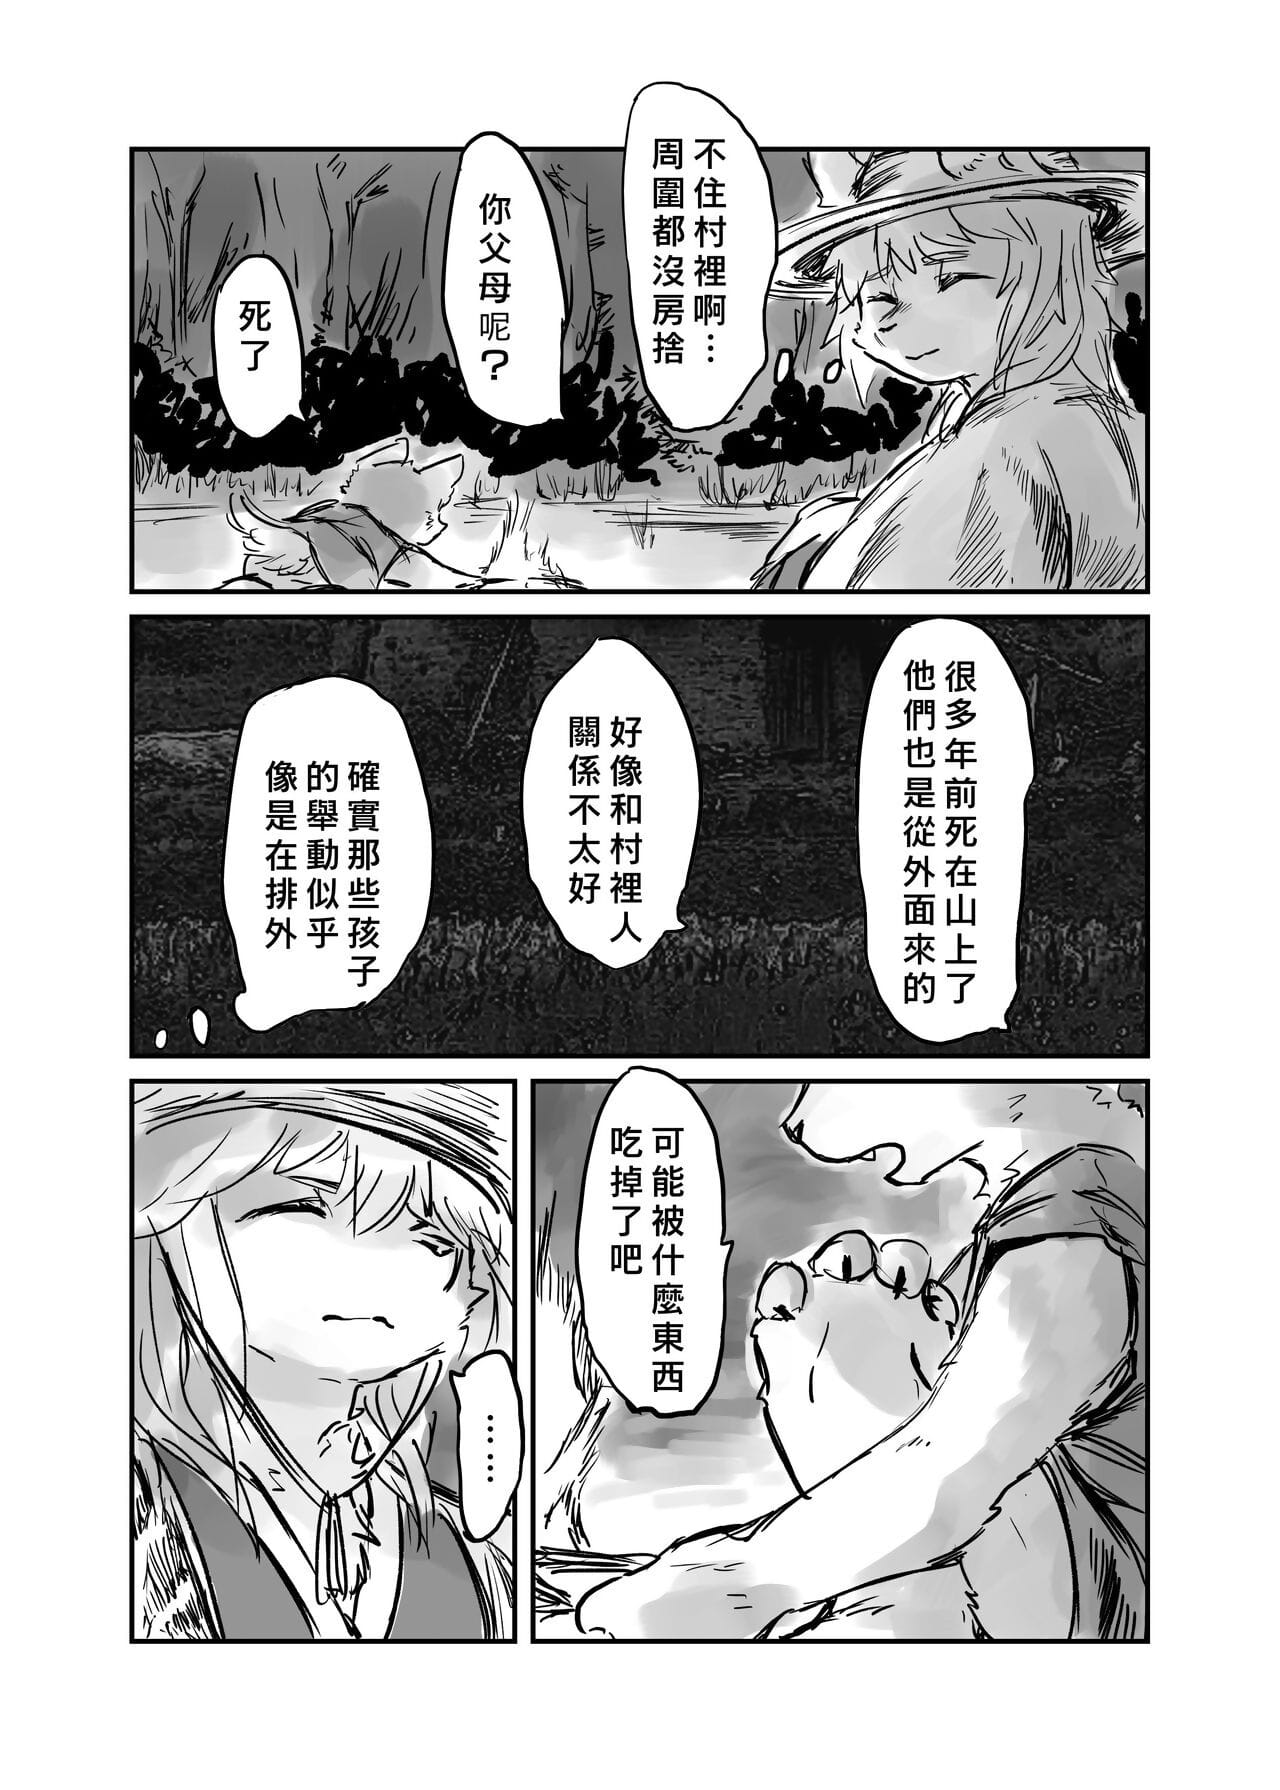 （The visitor 他乡之人 by：鬼流 page 1